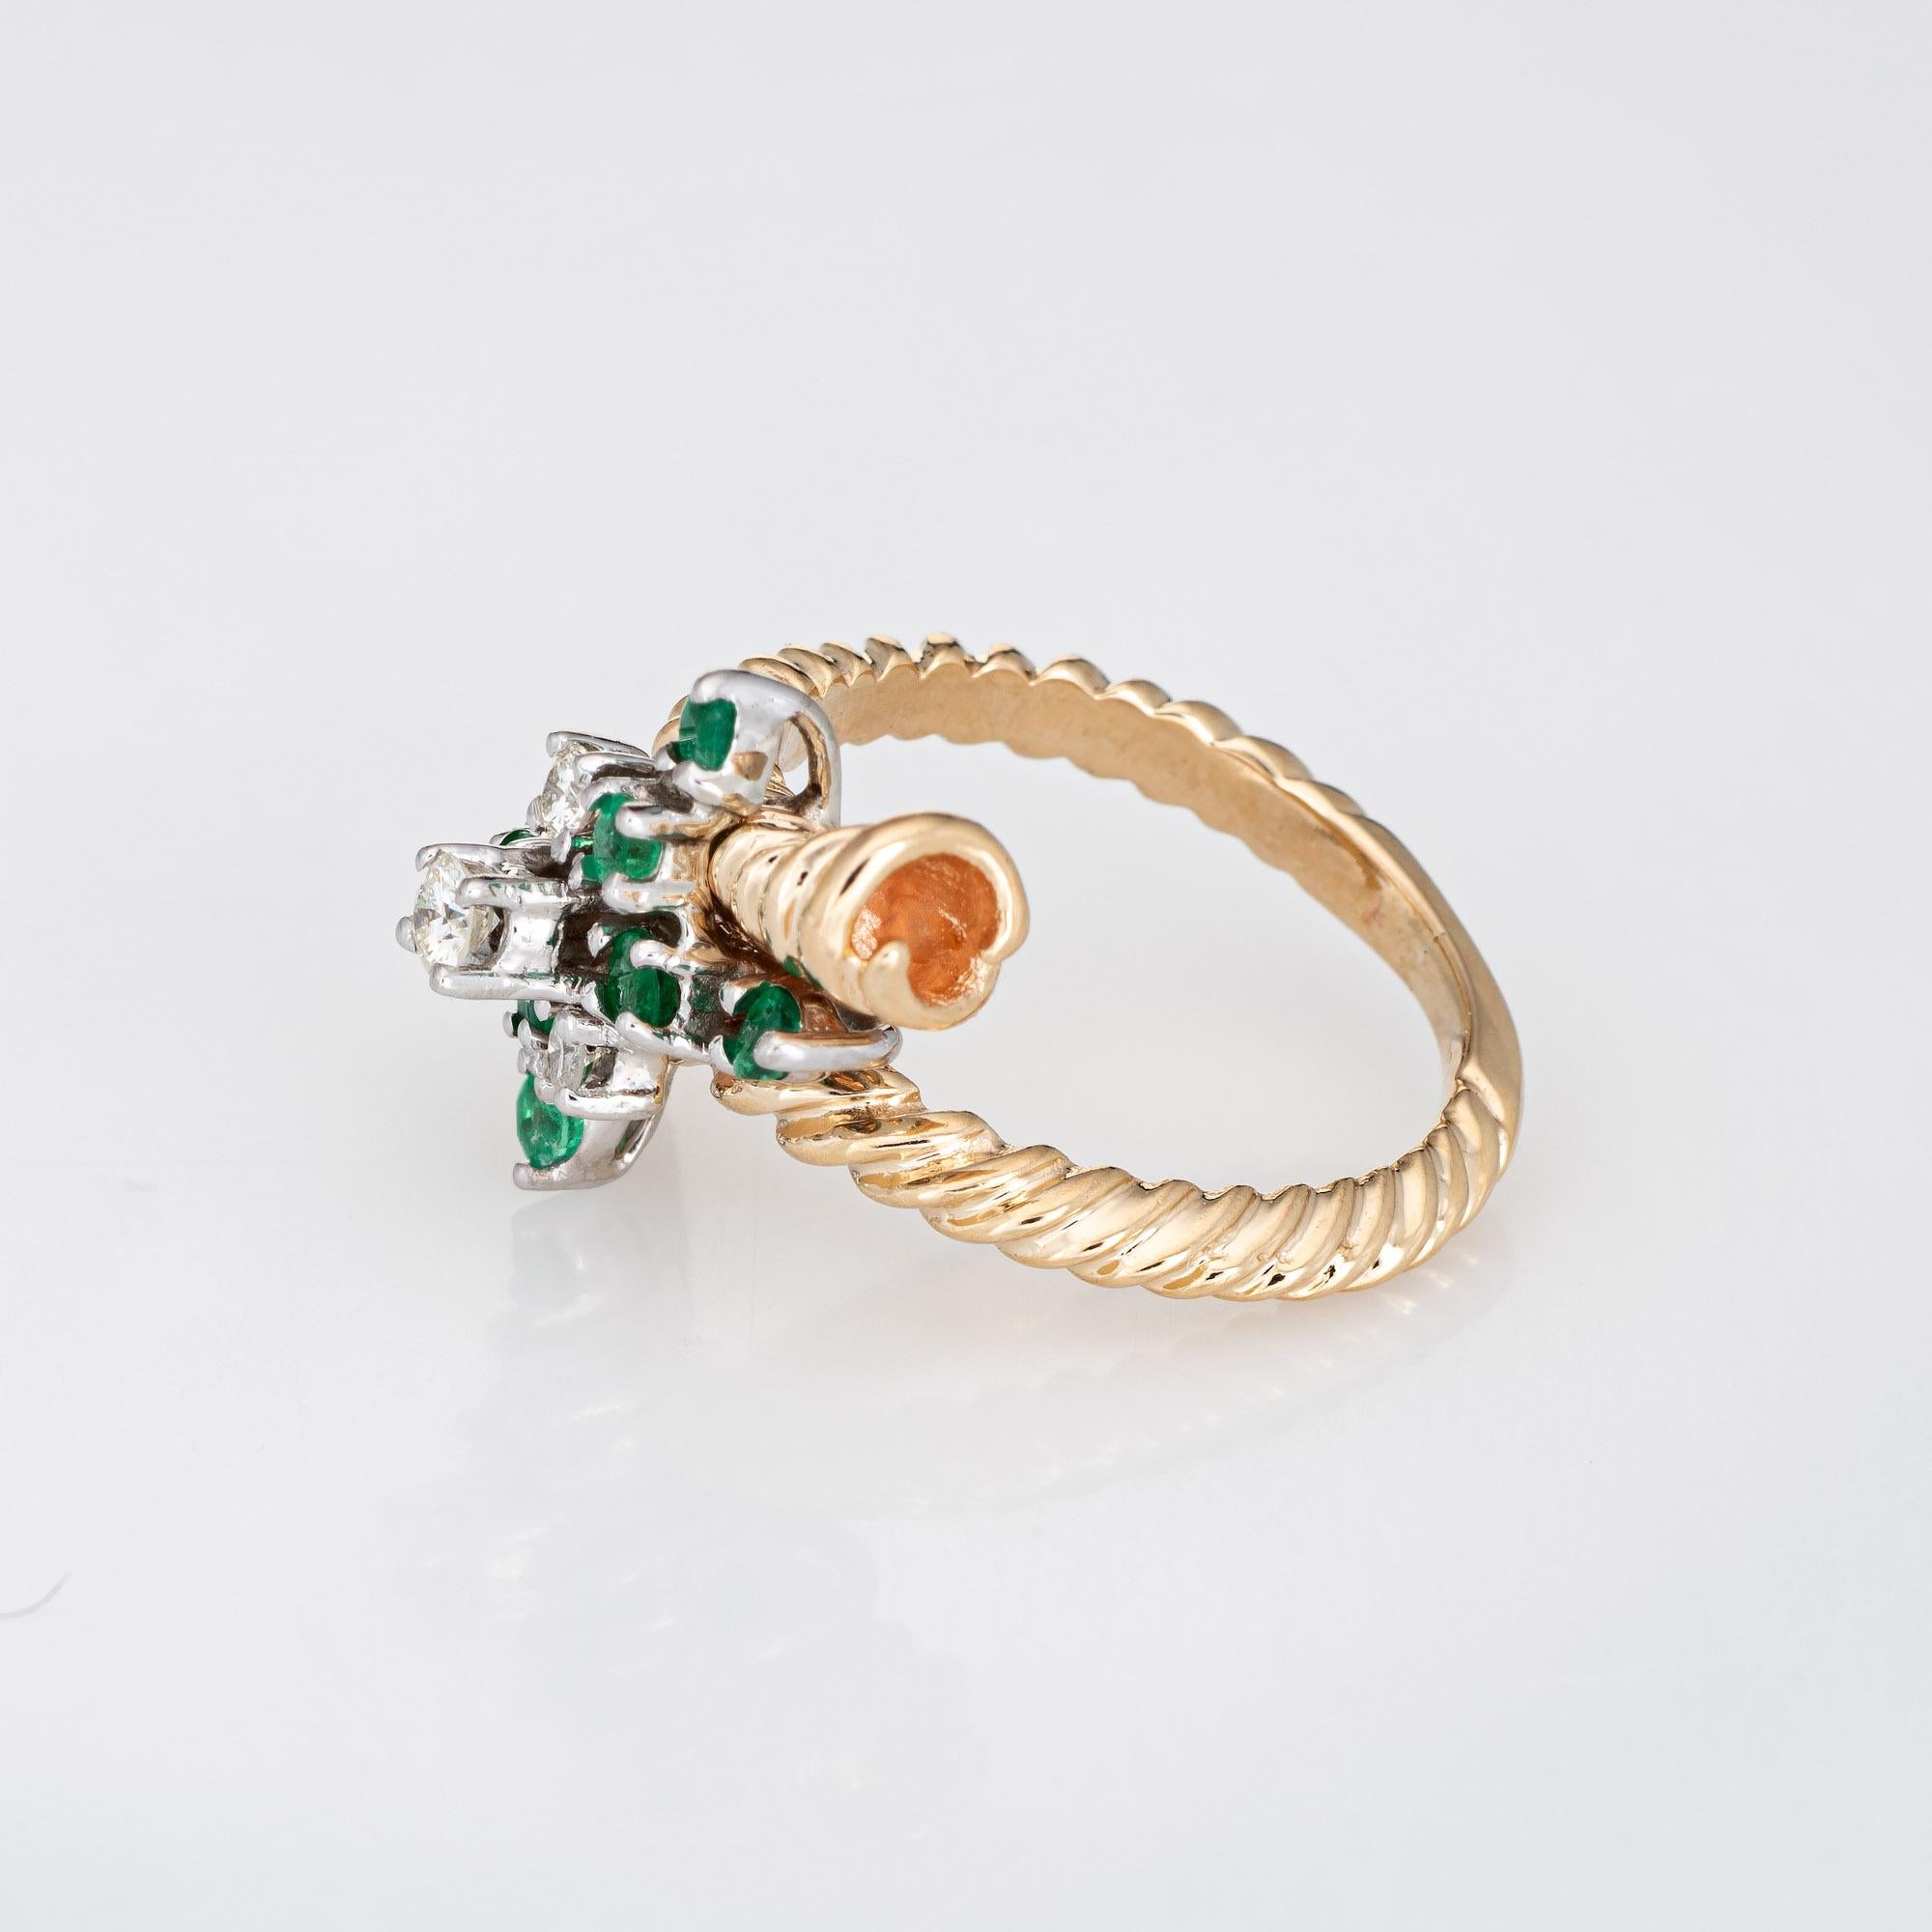 Round Cut Vintage Emerald Diamond Ring Cluster 14k Yellow Gold Estate Fine Jewelry For Sale